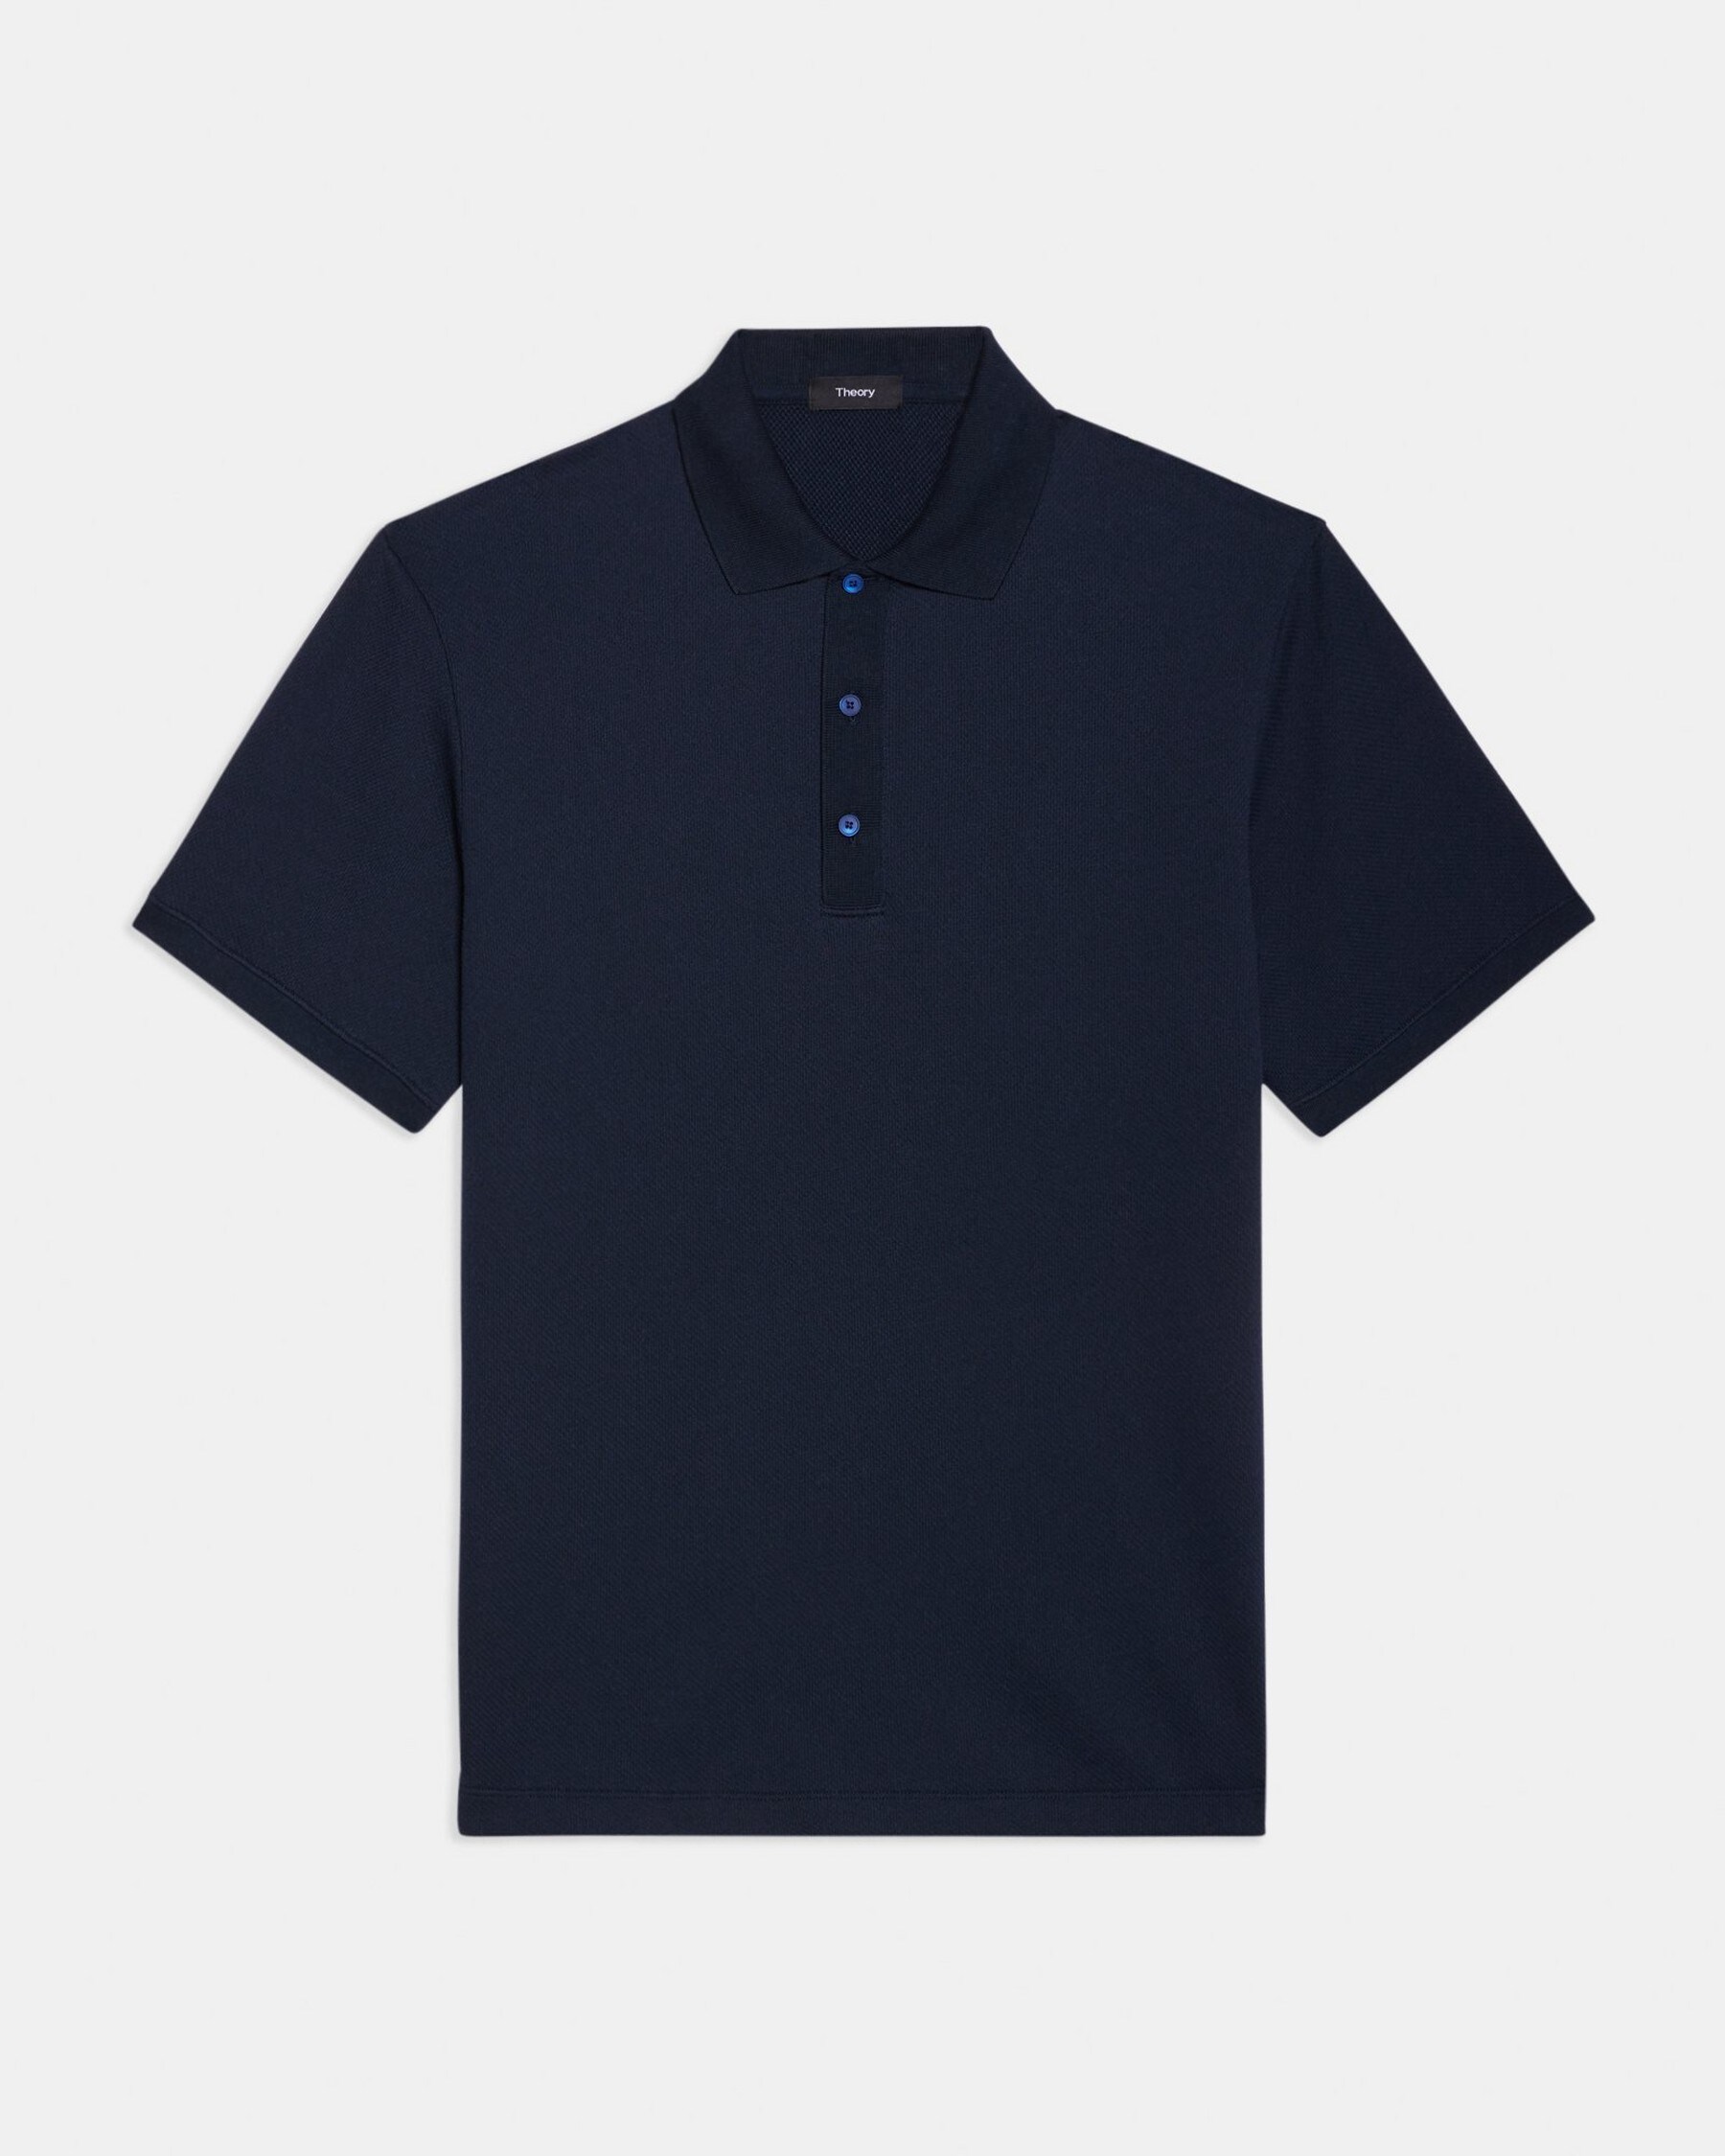 Droyer Polo Shirt in Studio Knit Jacquard